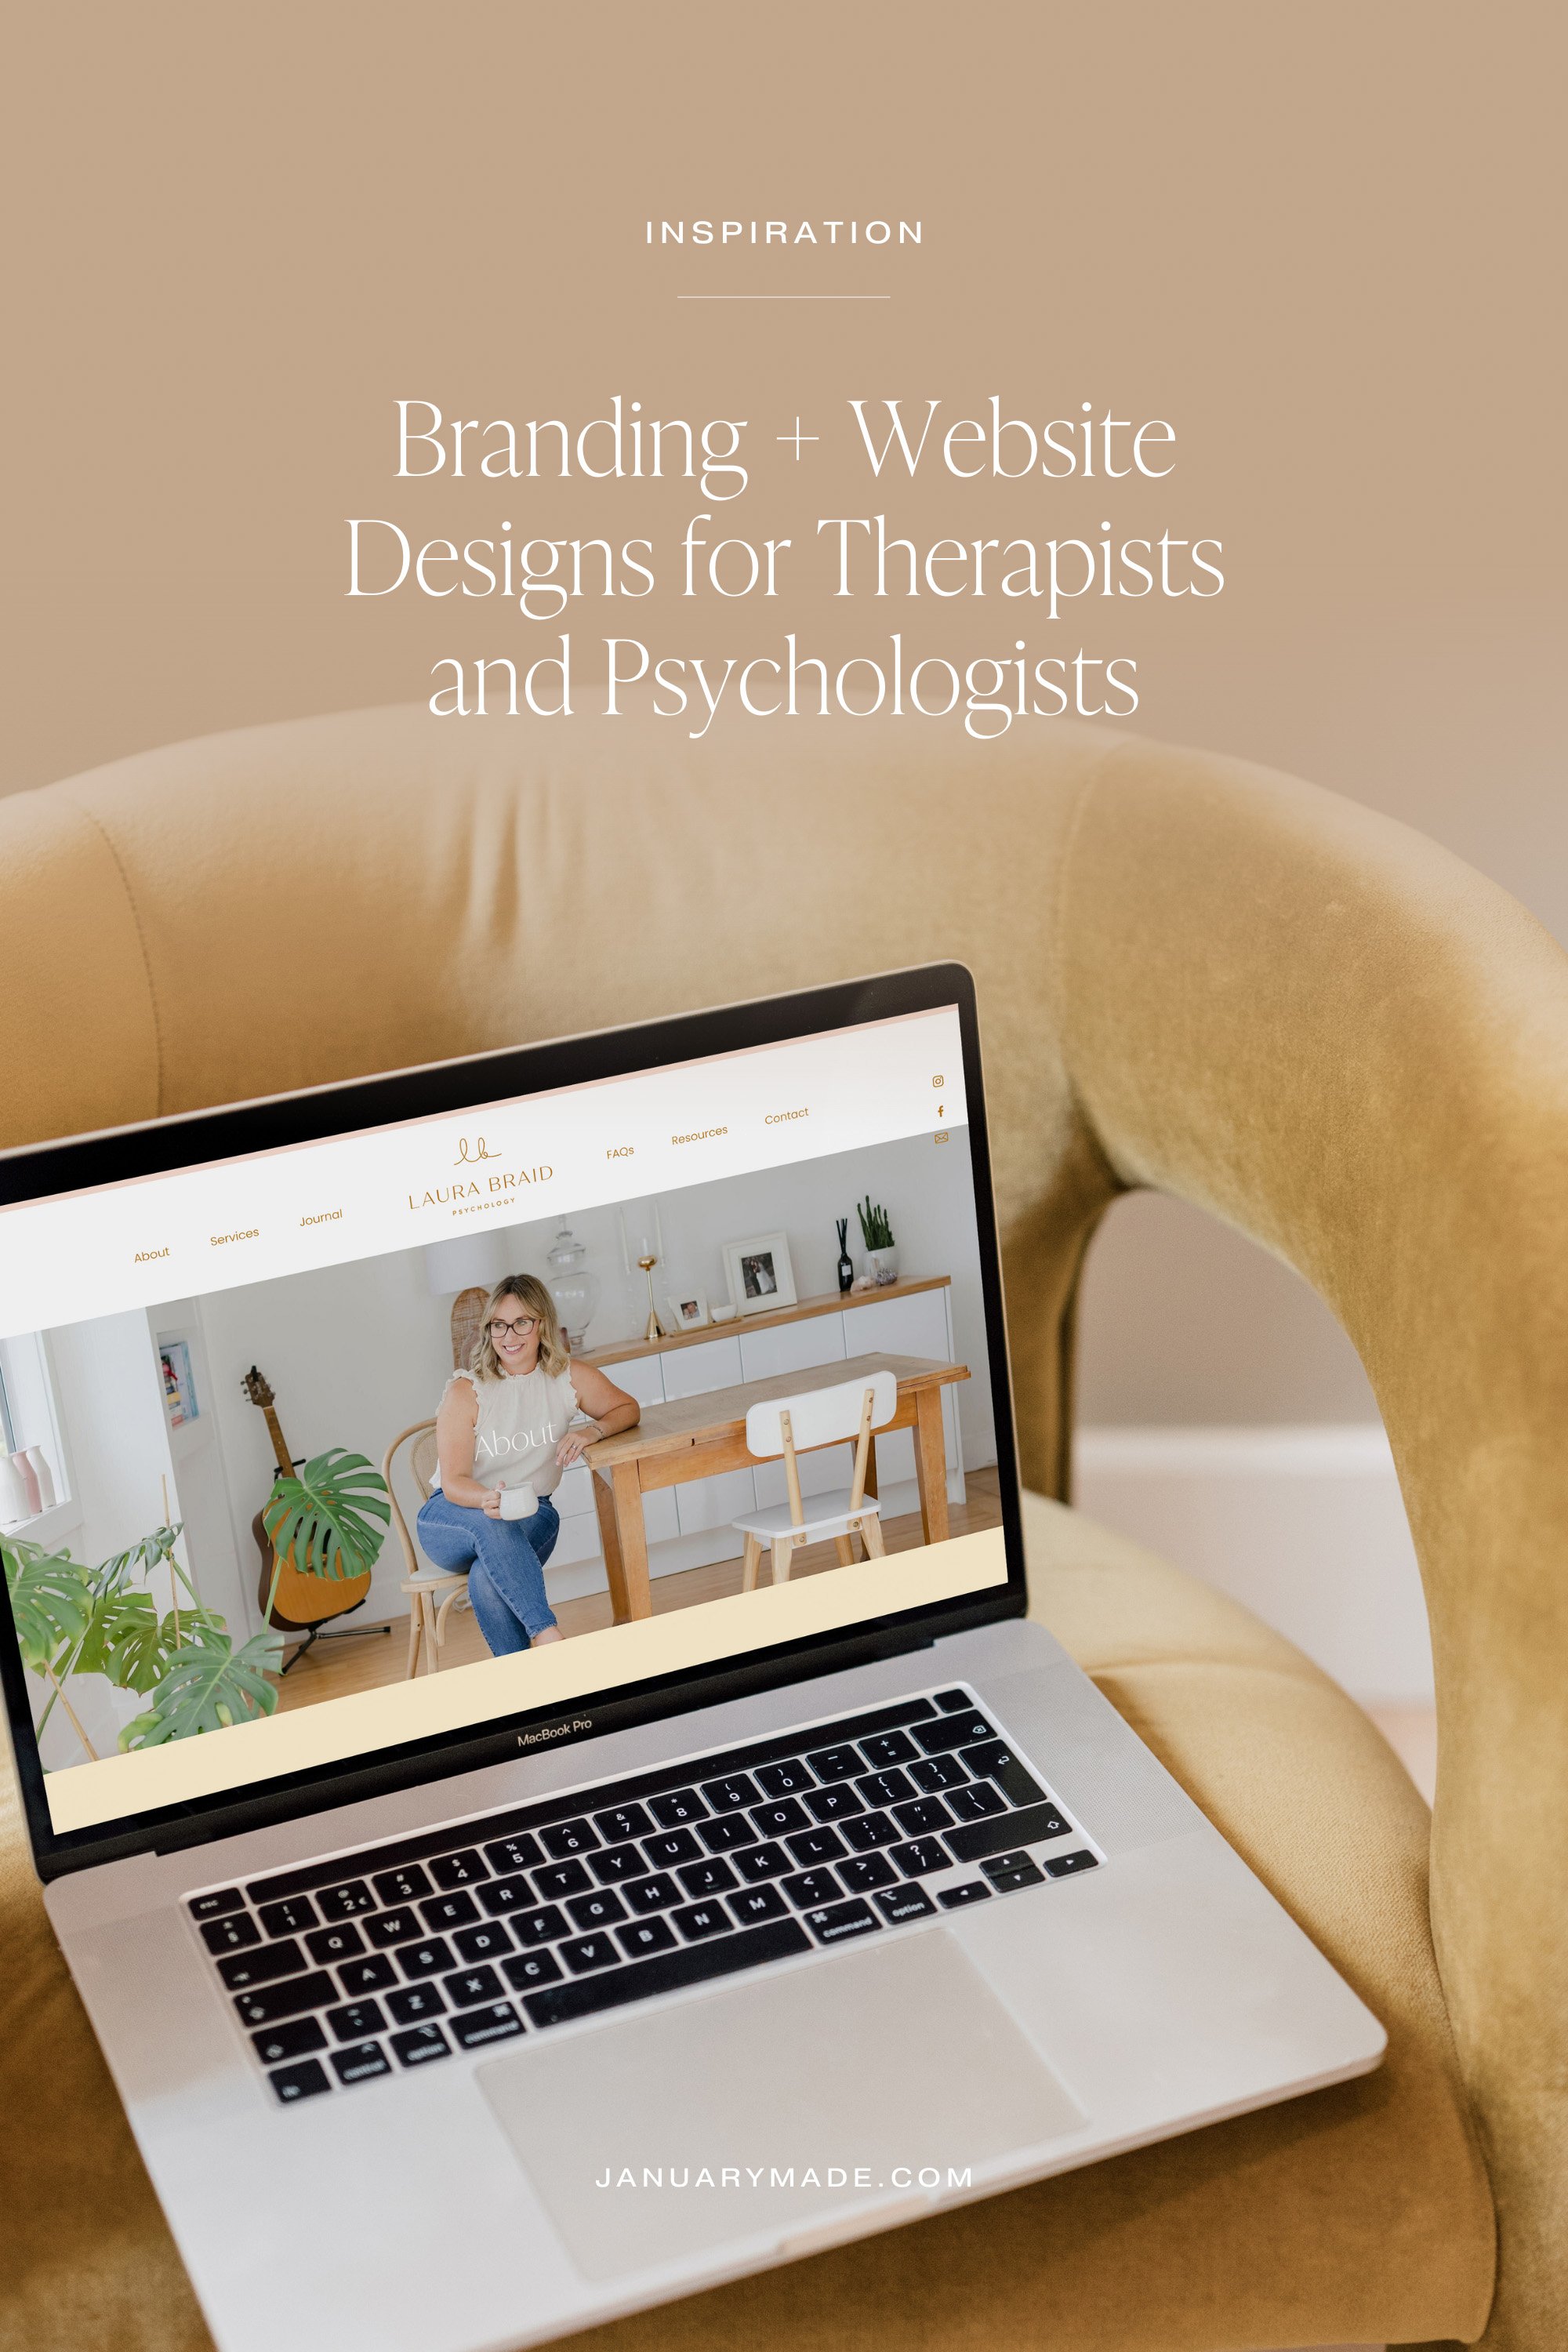 Empowering Connections: Transformative Branding + Website Designs for Therapists and Psychologists (Copy)